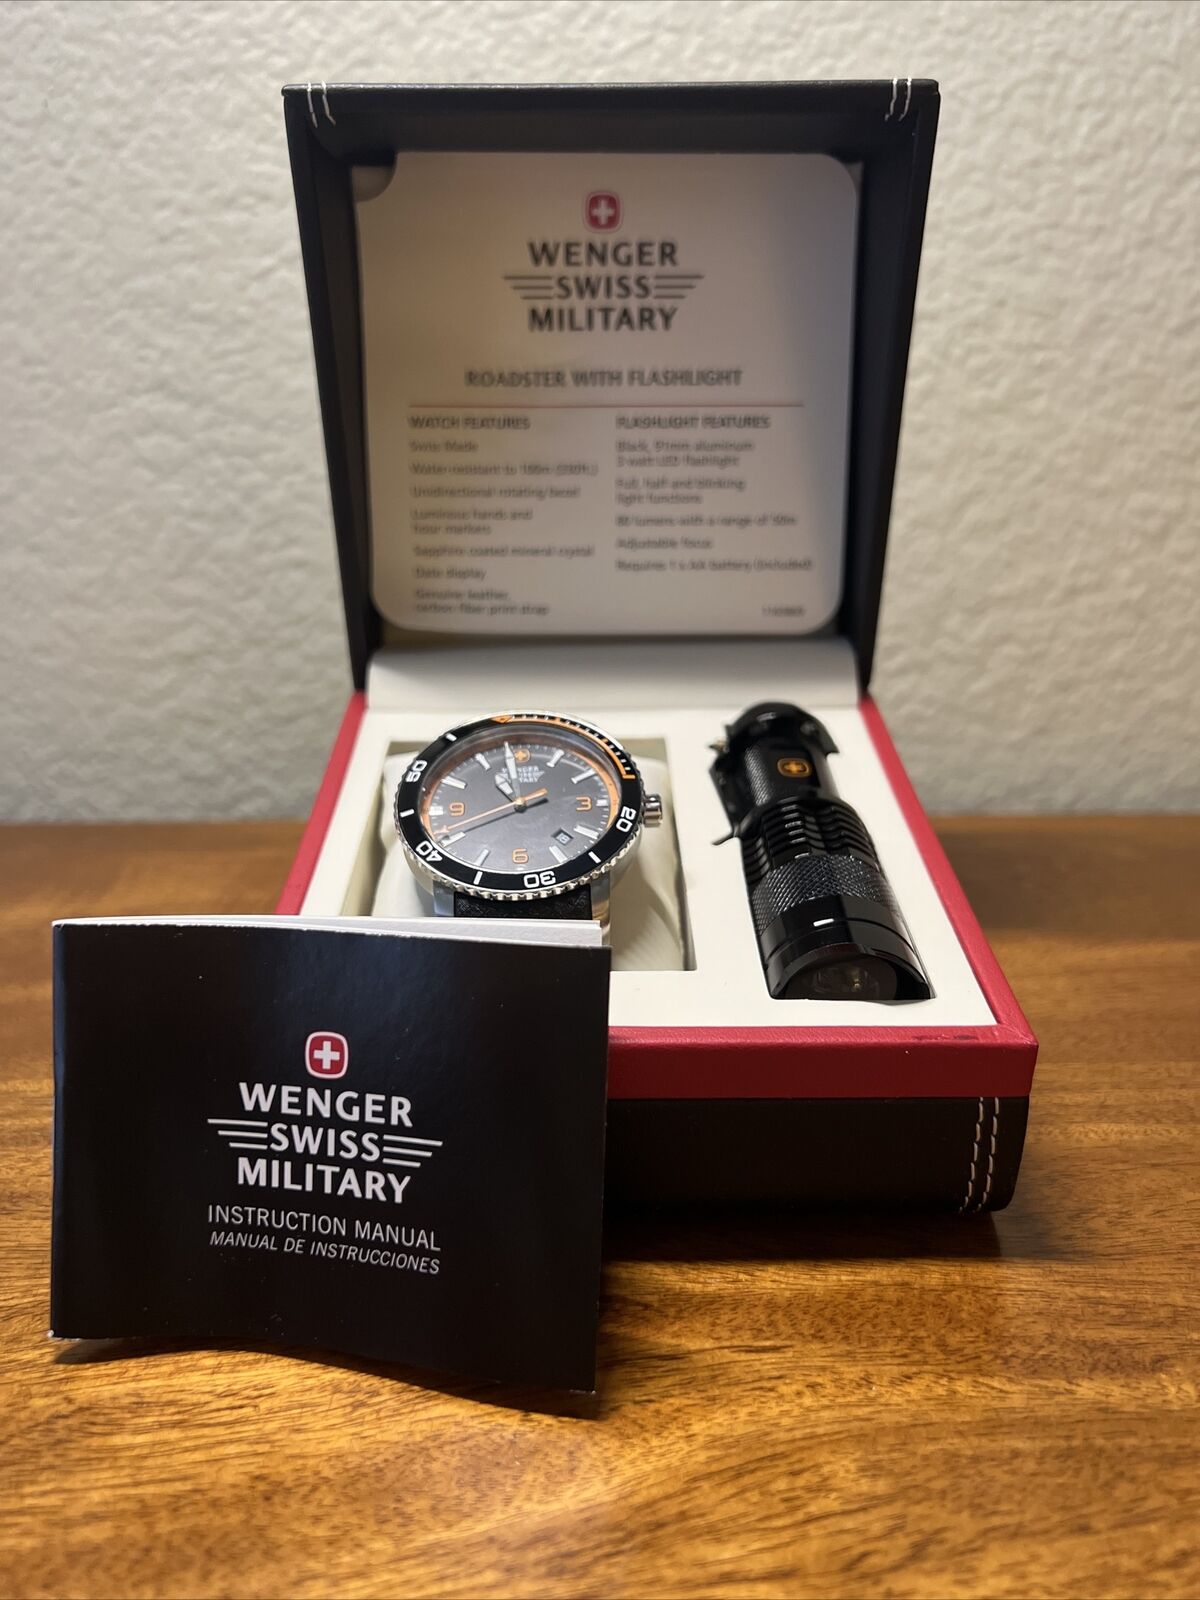 Wenger Swiss Mens Military Roadster Watch And Flashlight $295.00 Retail